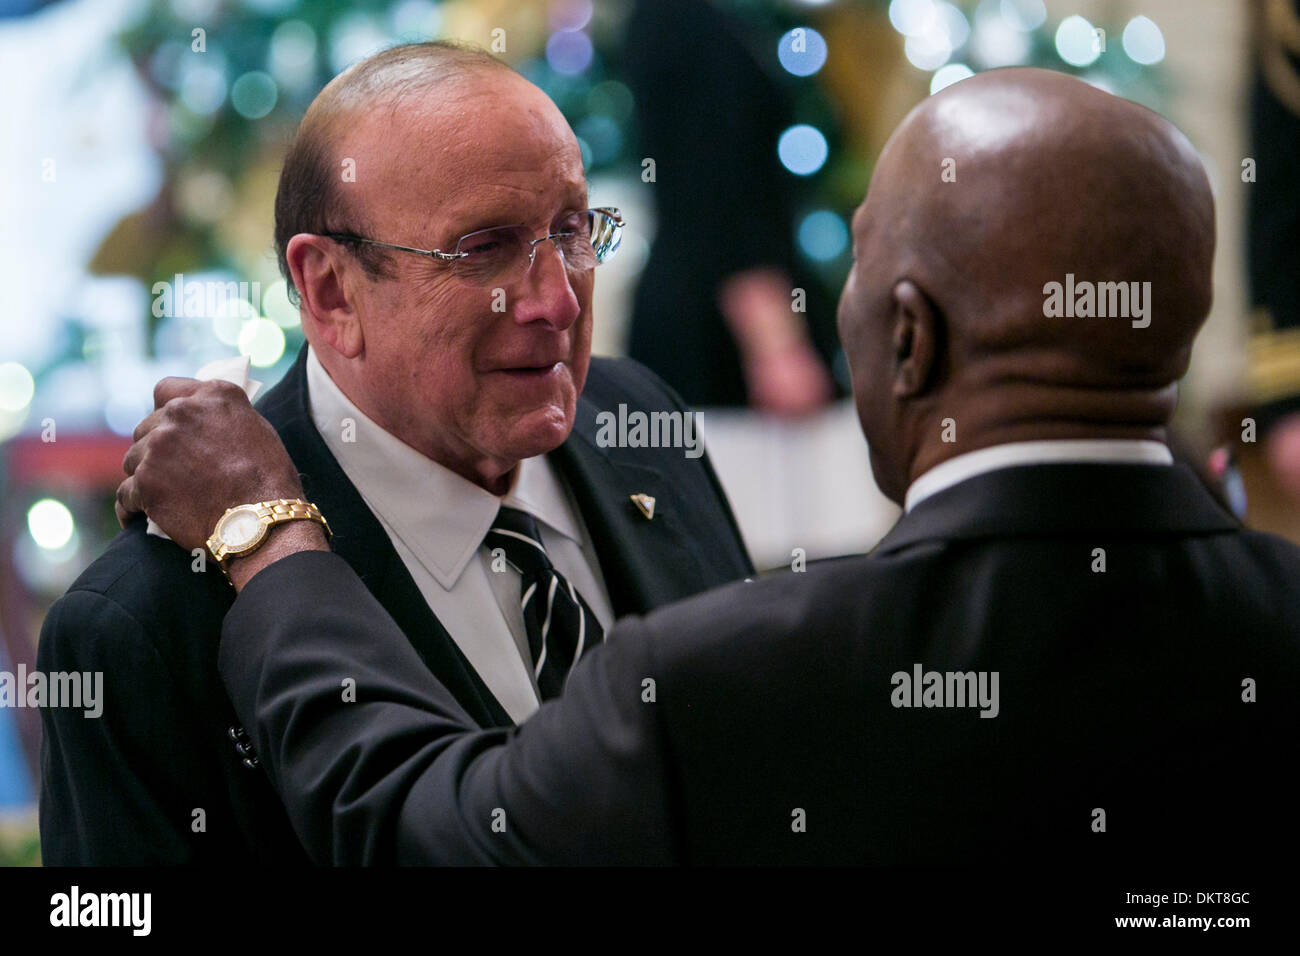 Washington, DC. 8th Dec, 2013. Clive Davis, left, and Buddy Guy, right attend a reception at the White House for the 2013 Kennedy Center Honorees on December 8, 2013 in Washington, DC., USA. Photo: Kristoffer Tripplaar/Sipa Press via CNP/dpa/Alamy Live News Stock Photo